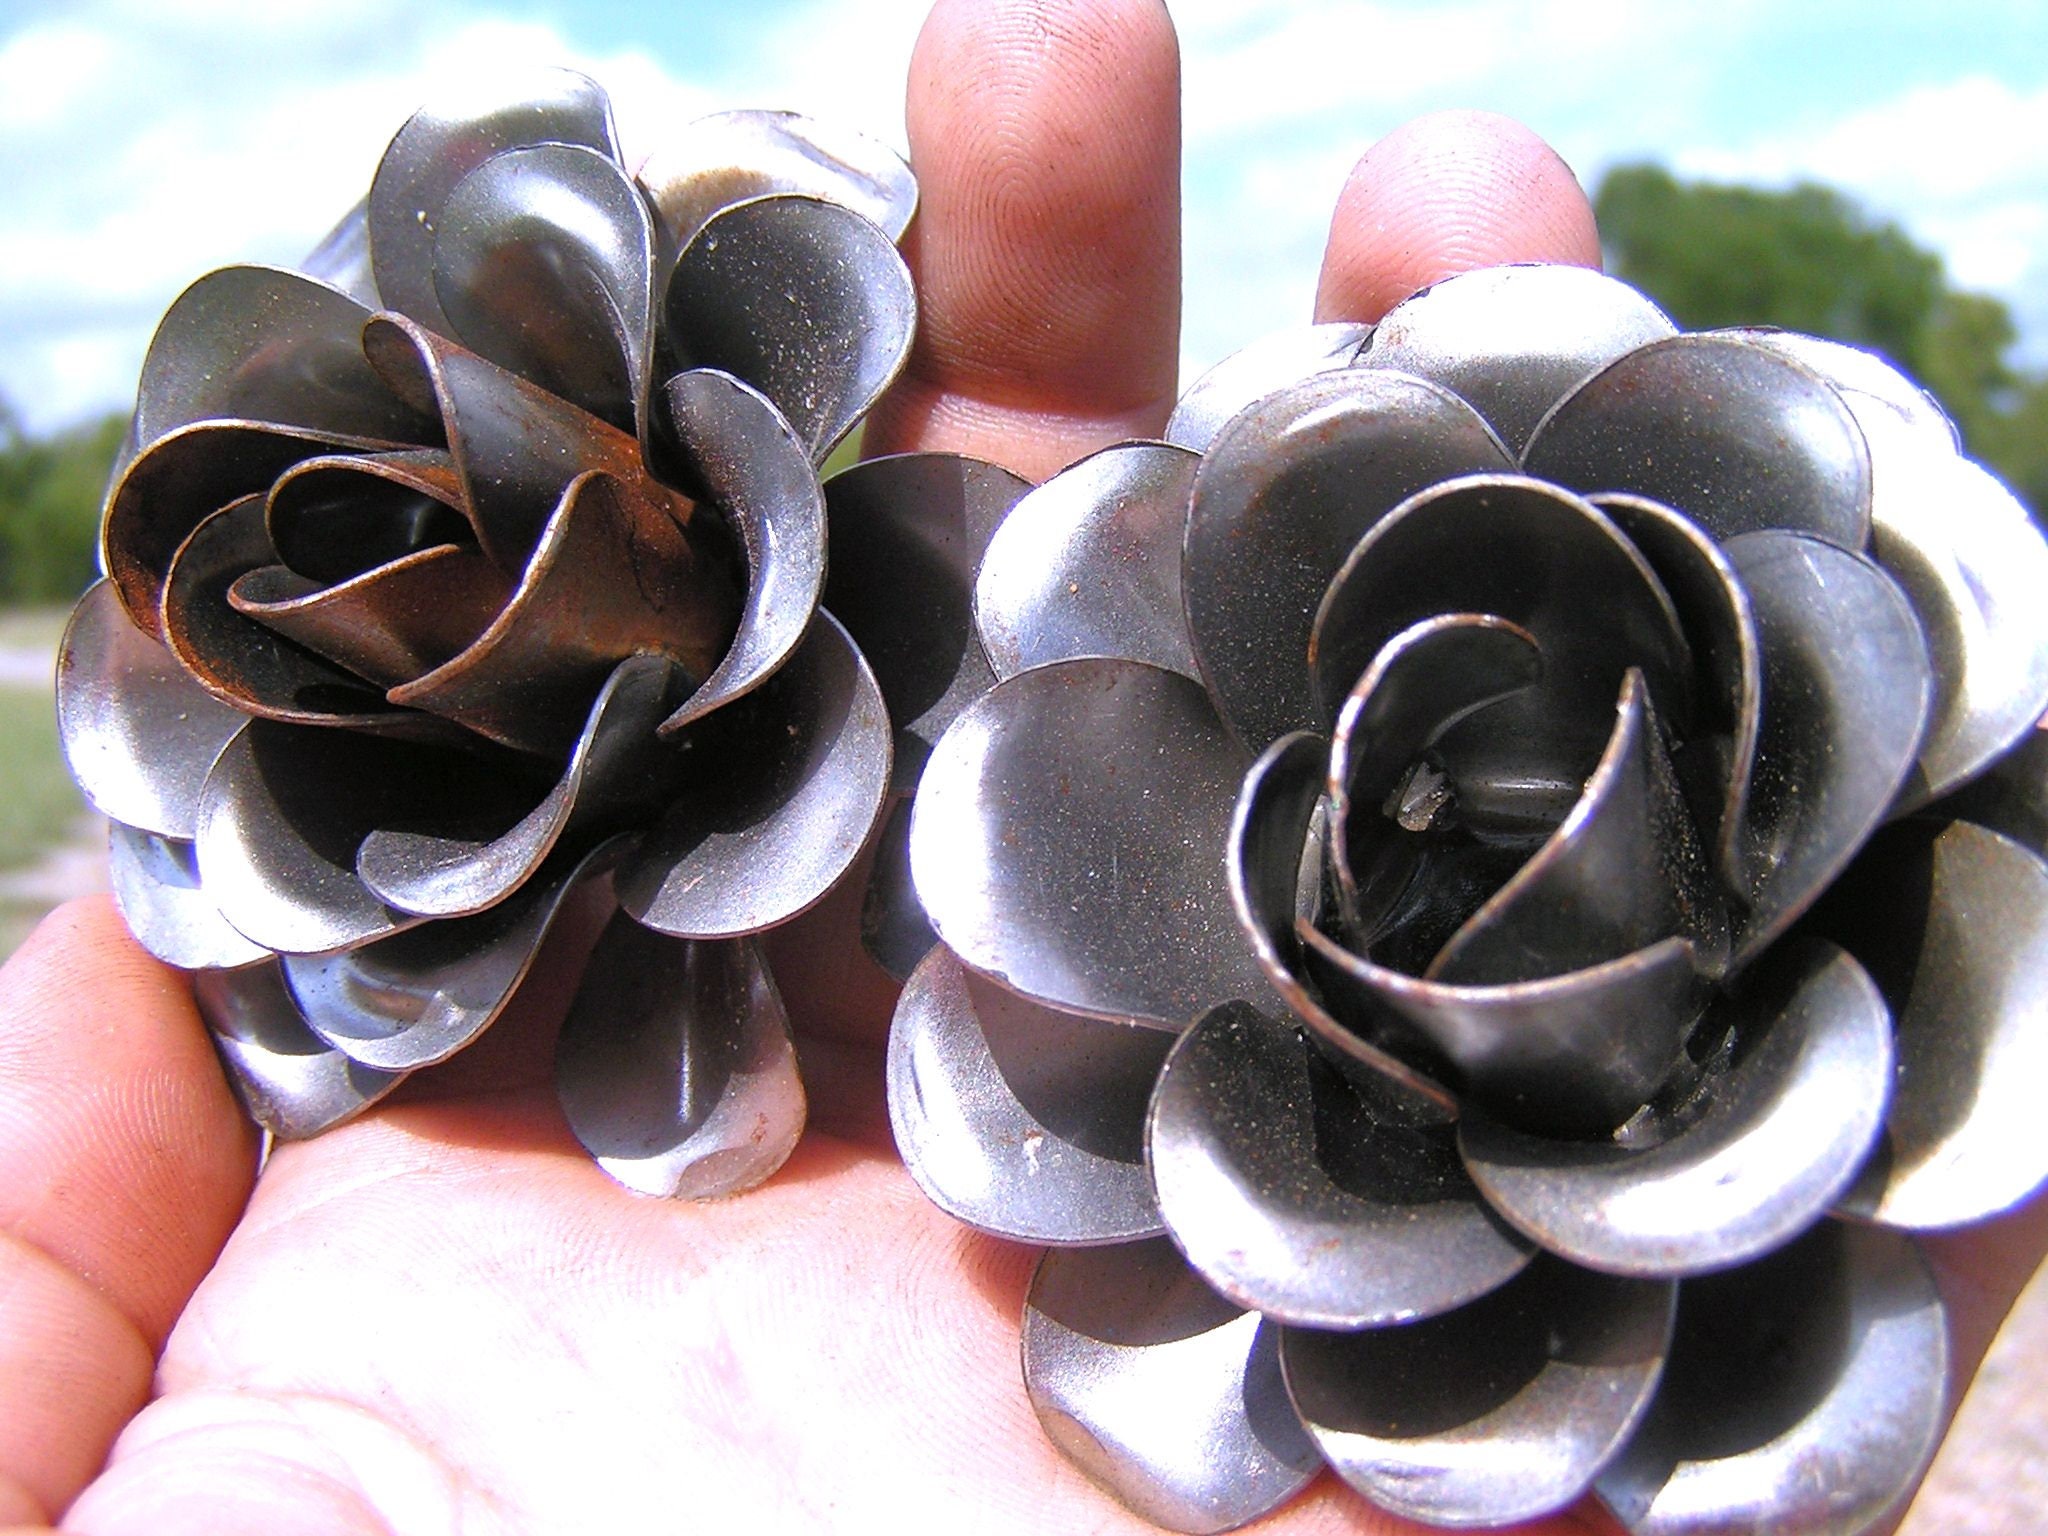 TWO Large metal Roses, flowers for crafts, jewelry